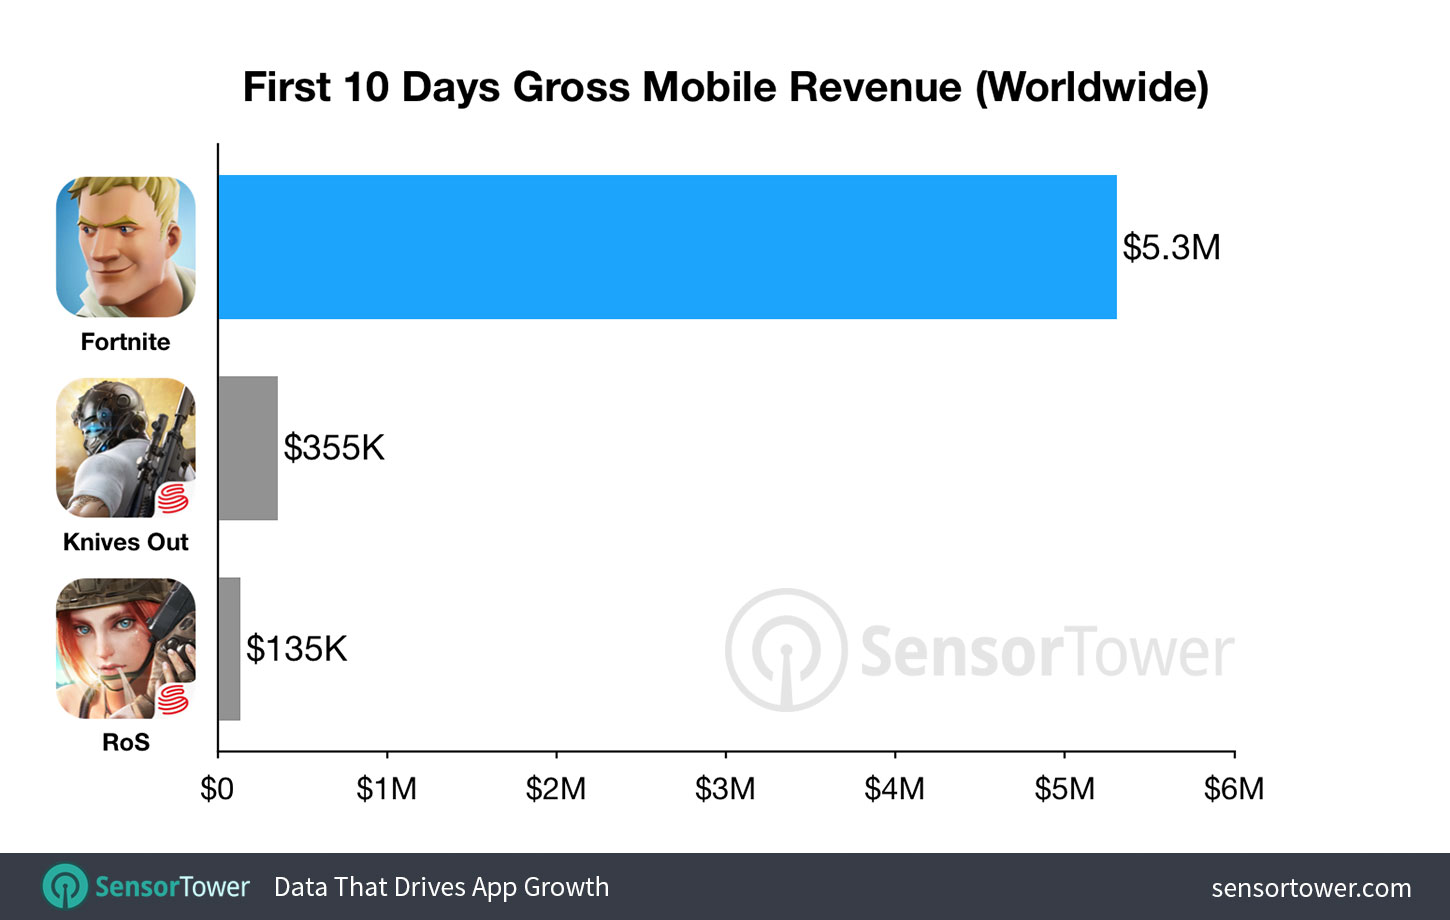 Chart showing Fortnite's first 10 days of gross revenue versus Knives Out and Rule of Survival